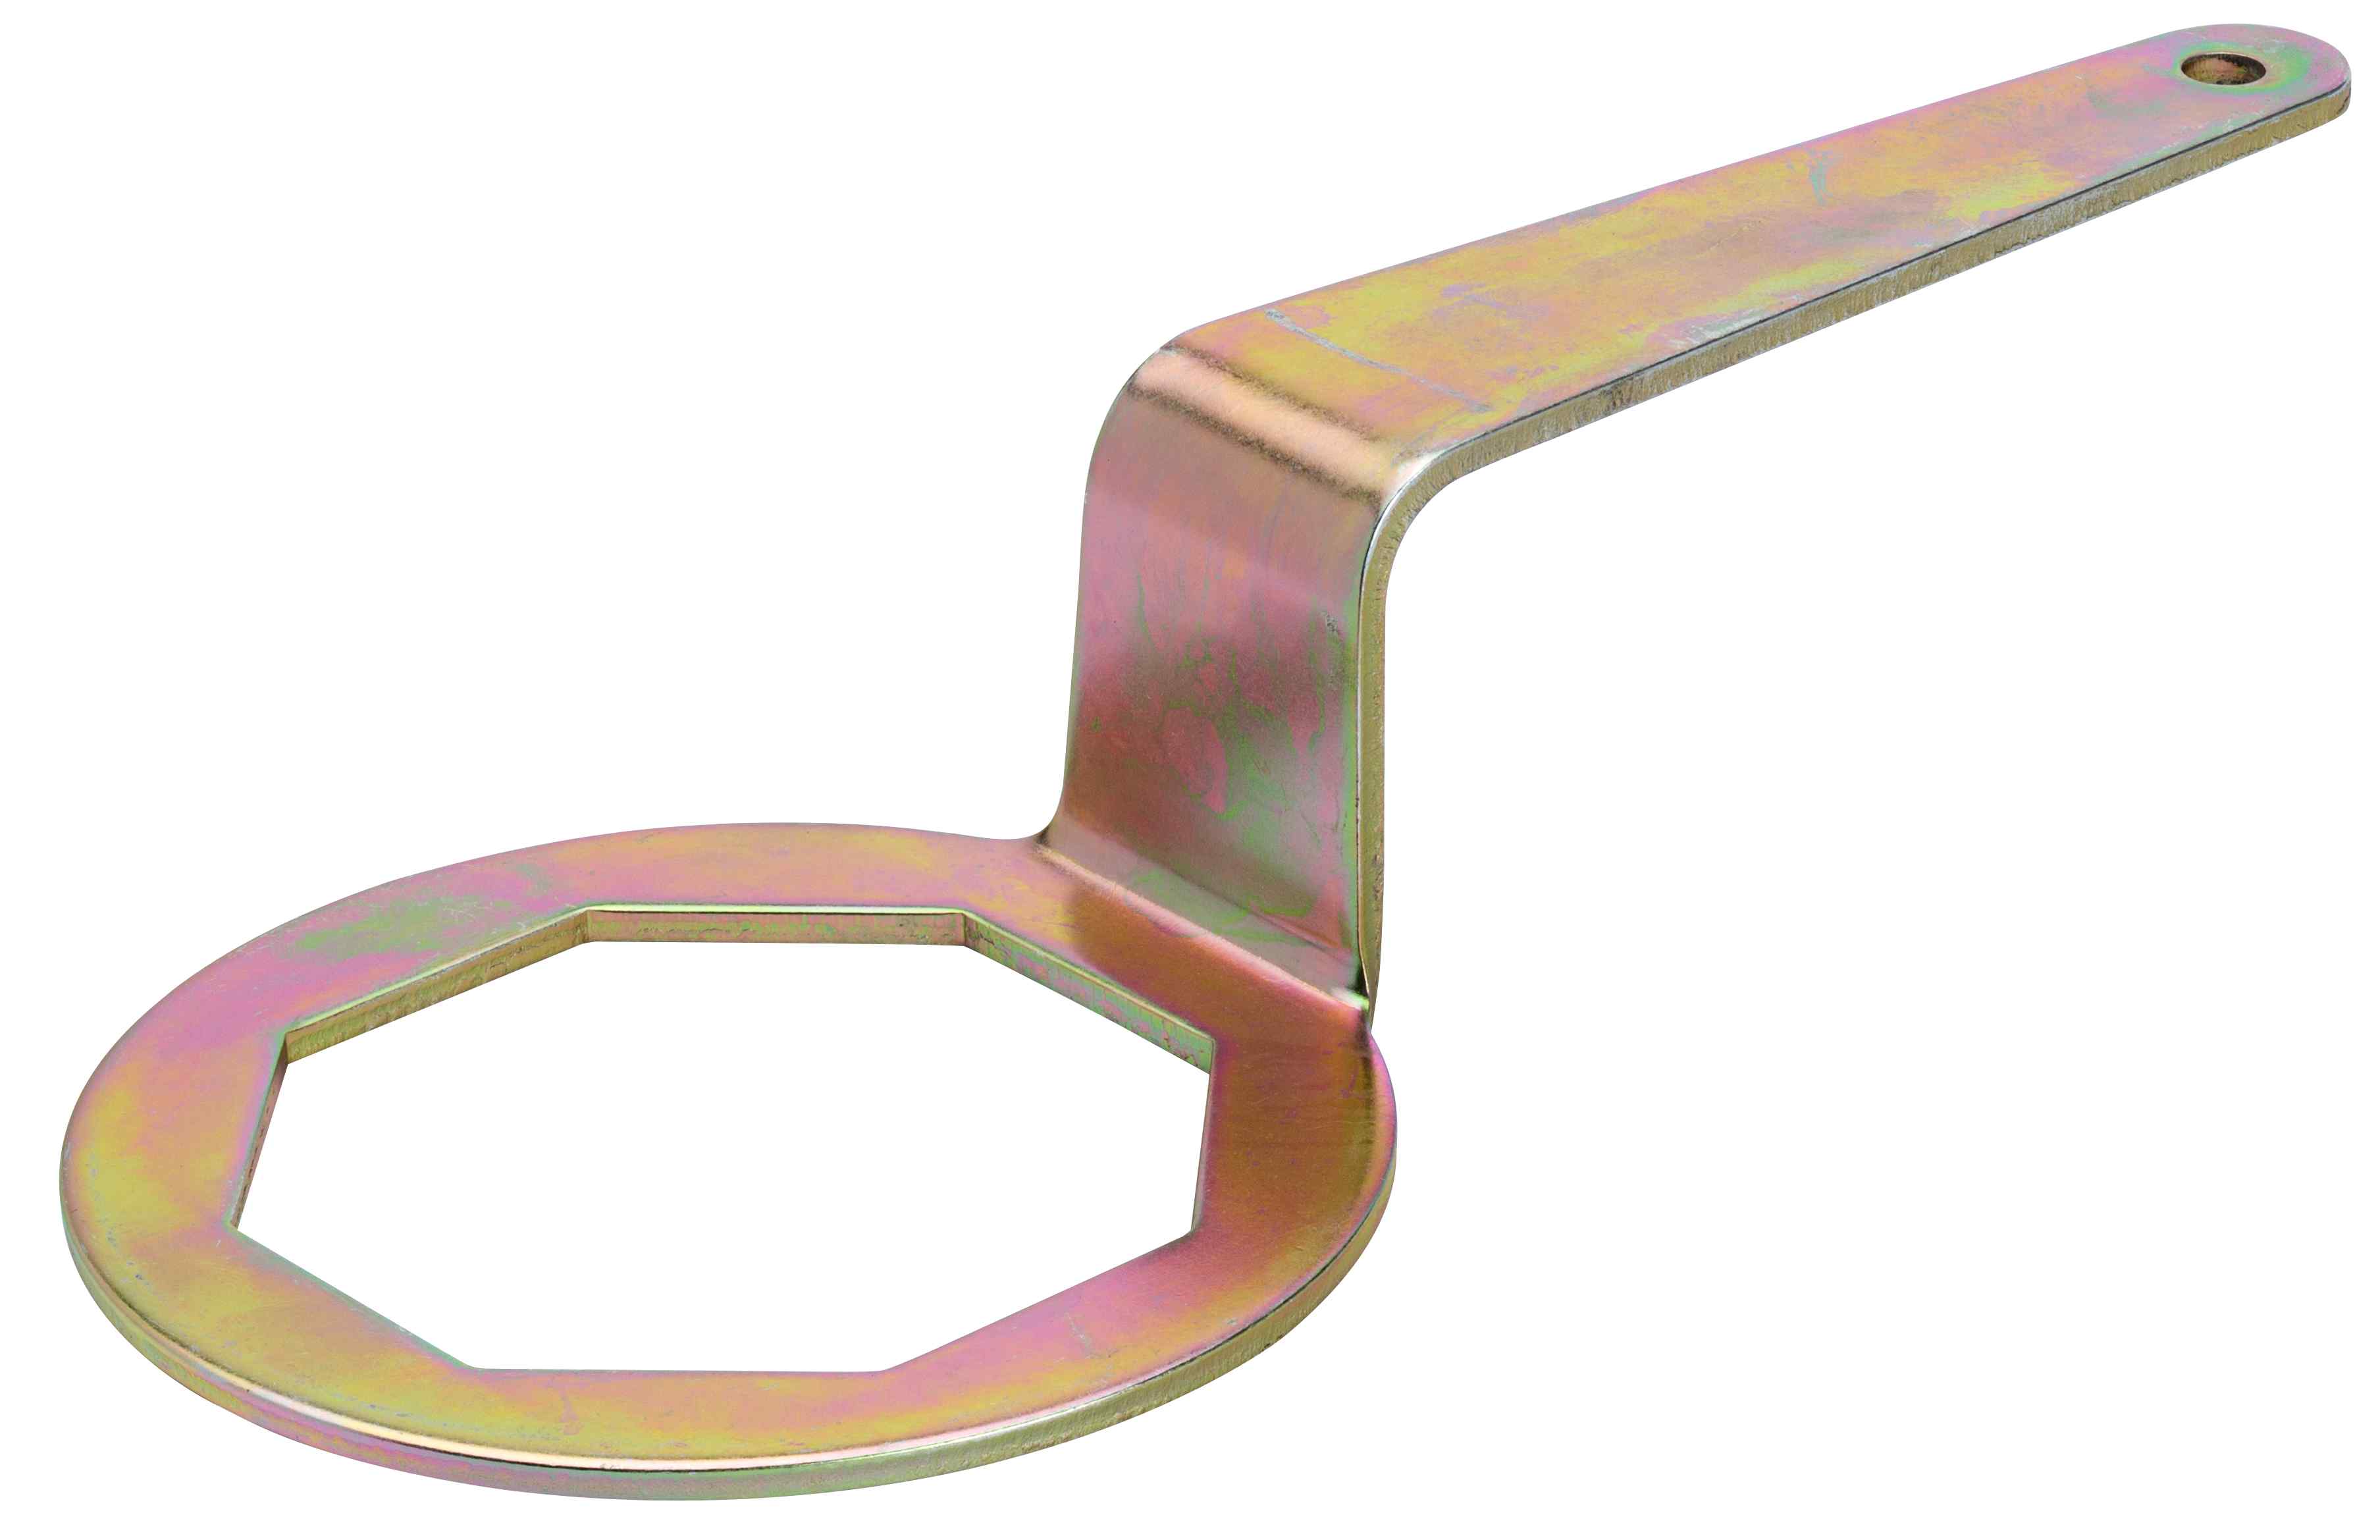 OX Trade Immersion Spanner